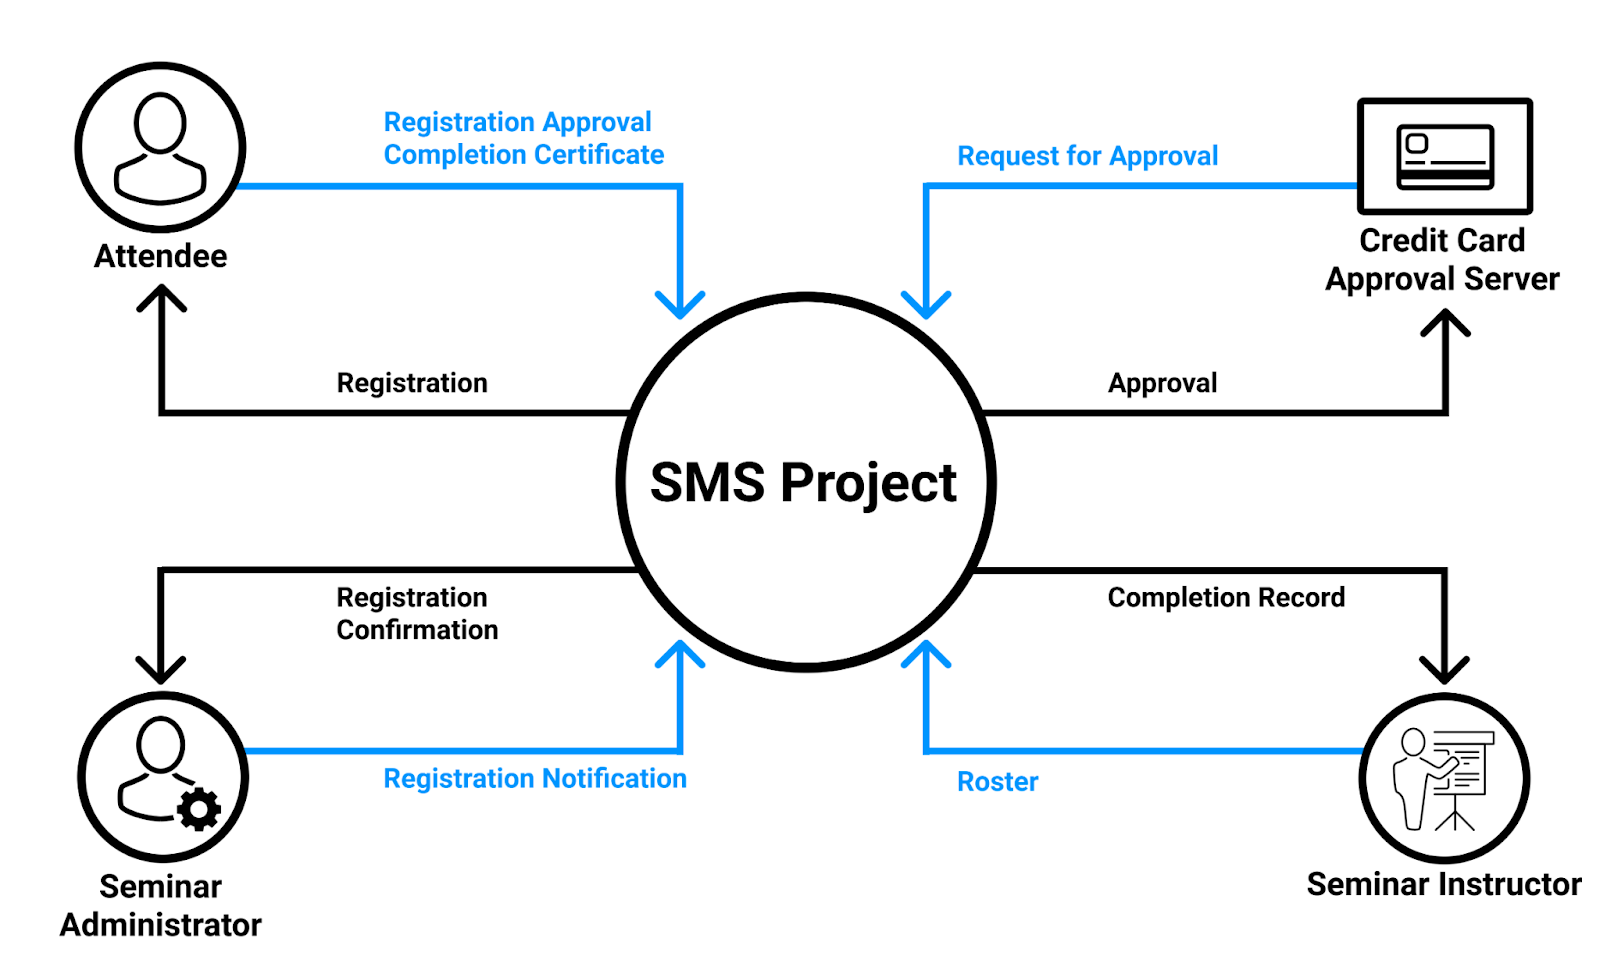 A graphic explaining Context DFD - An SMS project includes an Attendee, a Credit Card Approval Server, a Seminar Instructor, and a Seminar Administrator. All requests and approvals go between the project and the four outer parts.